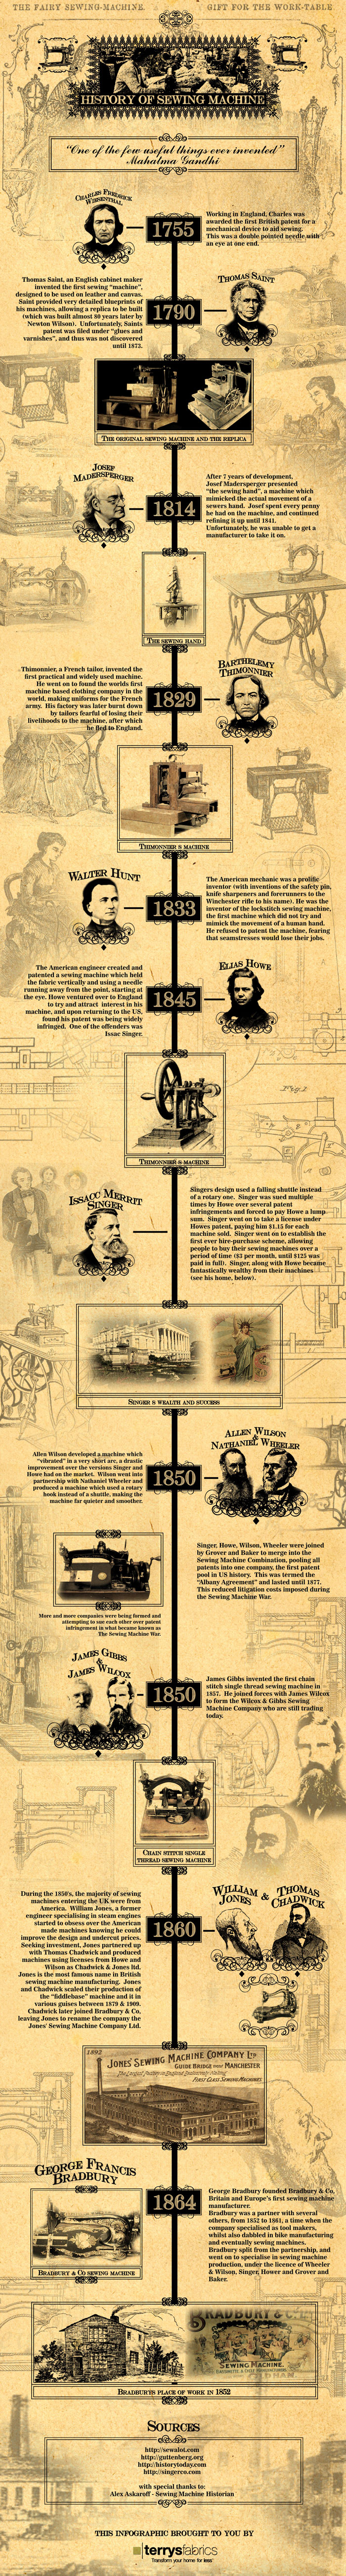 History of Sewing Machine